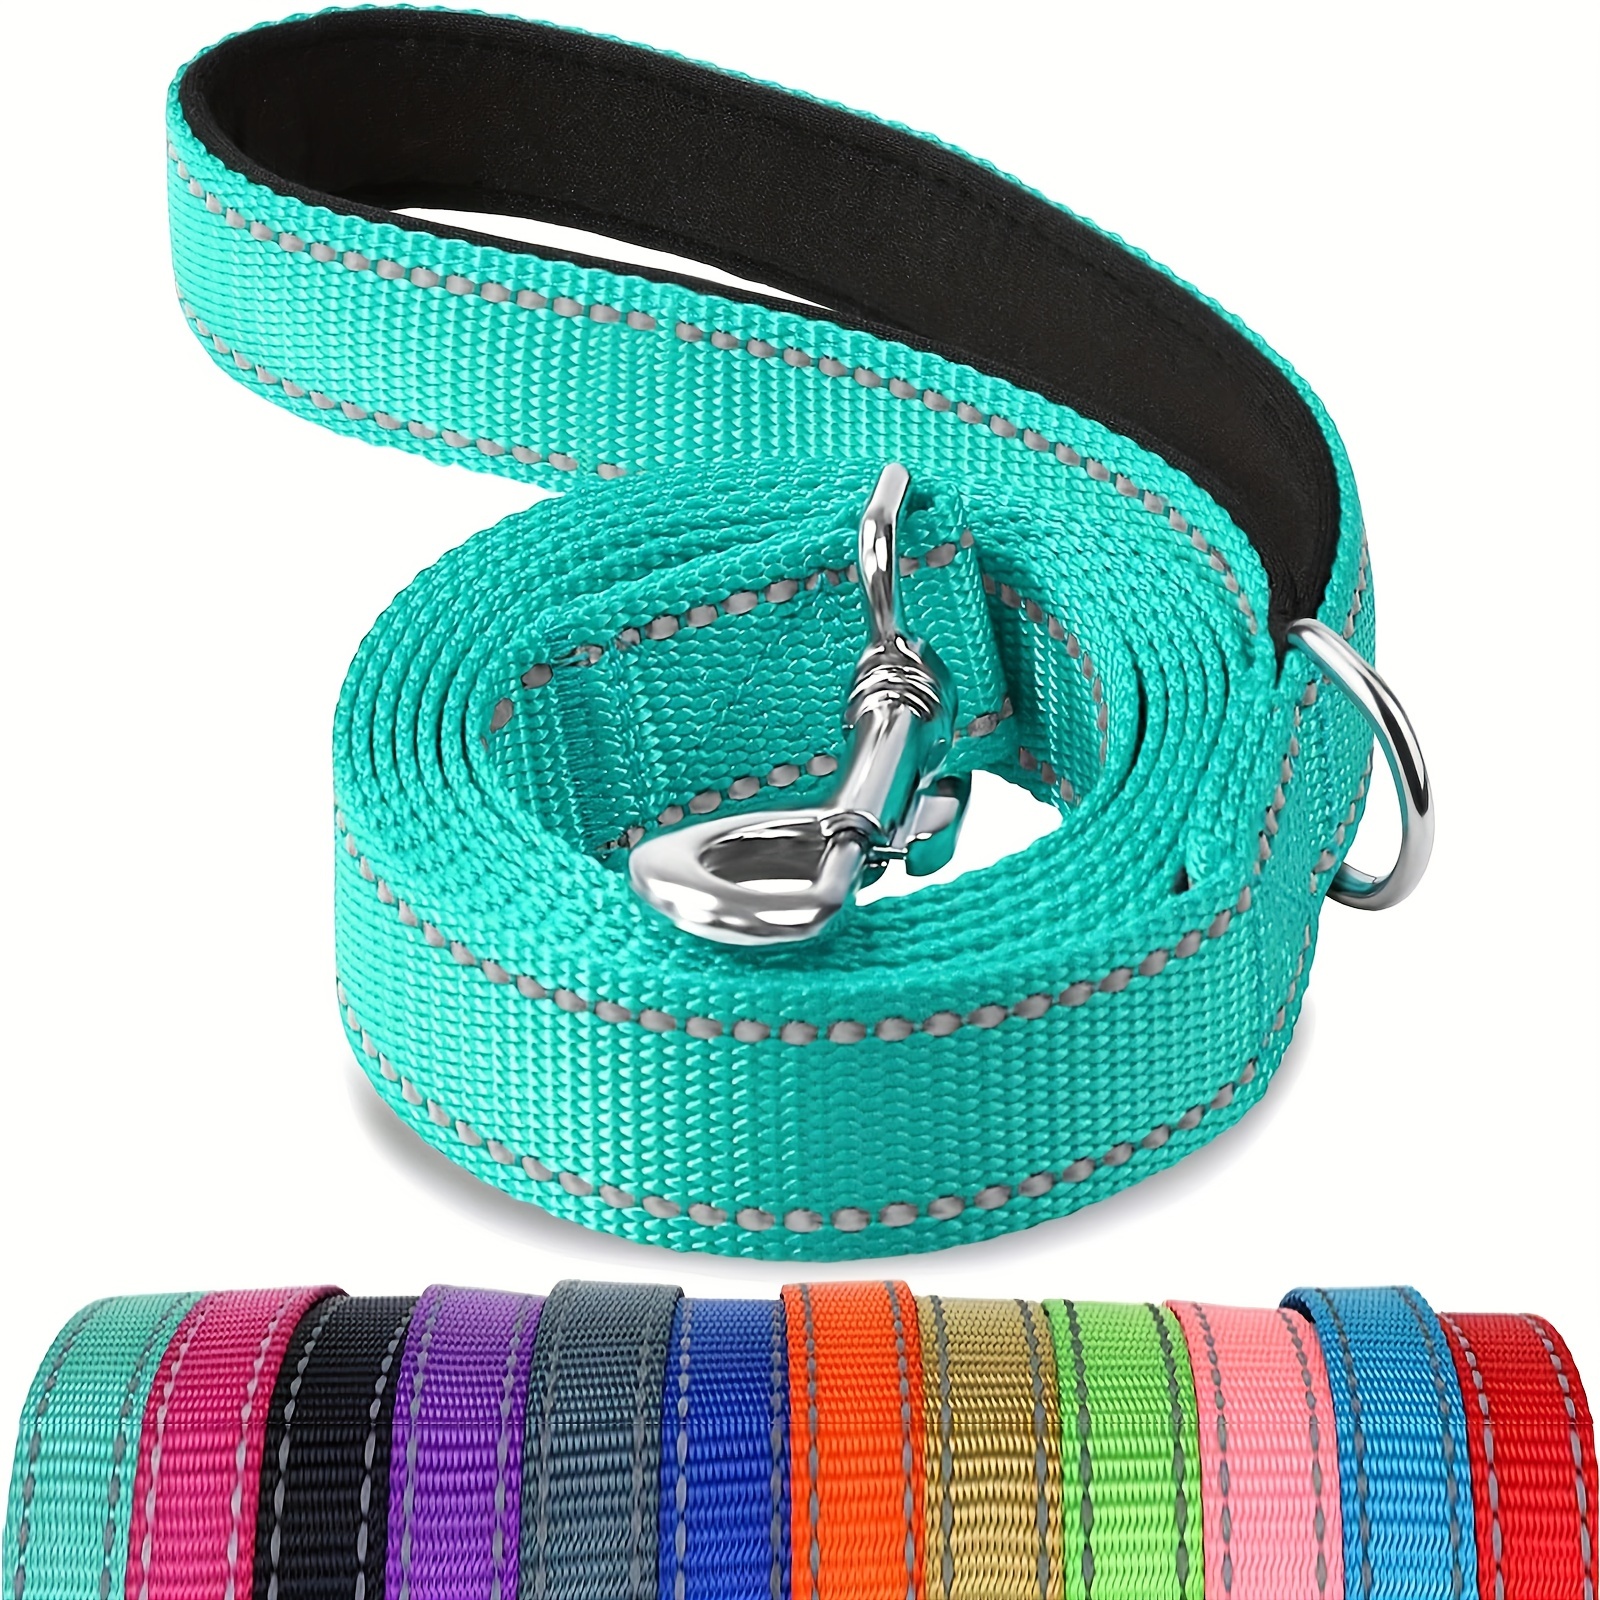 

1pc Single Sided Reflective Dog Leash Soft Neoprene Padded Breathable 1 Inch Wide, Pet Leash 6ft/5ft/4ft For Medium & Large Dogs Walking And Training